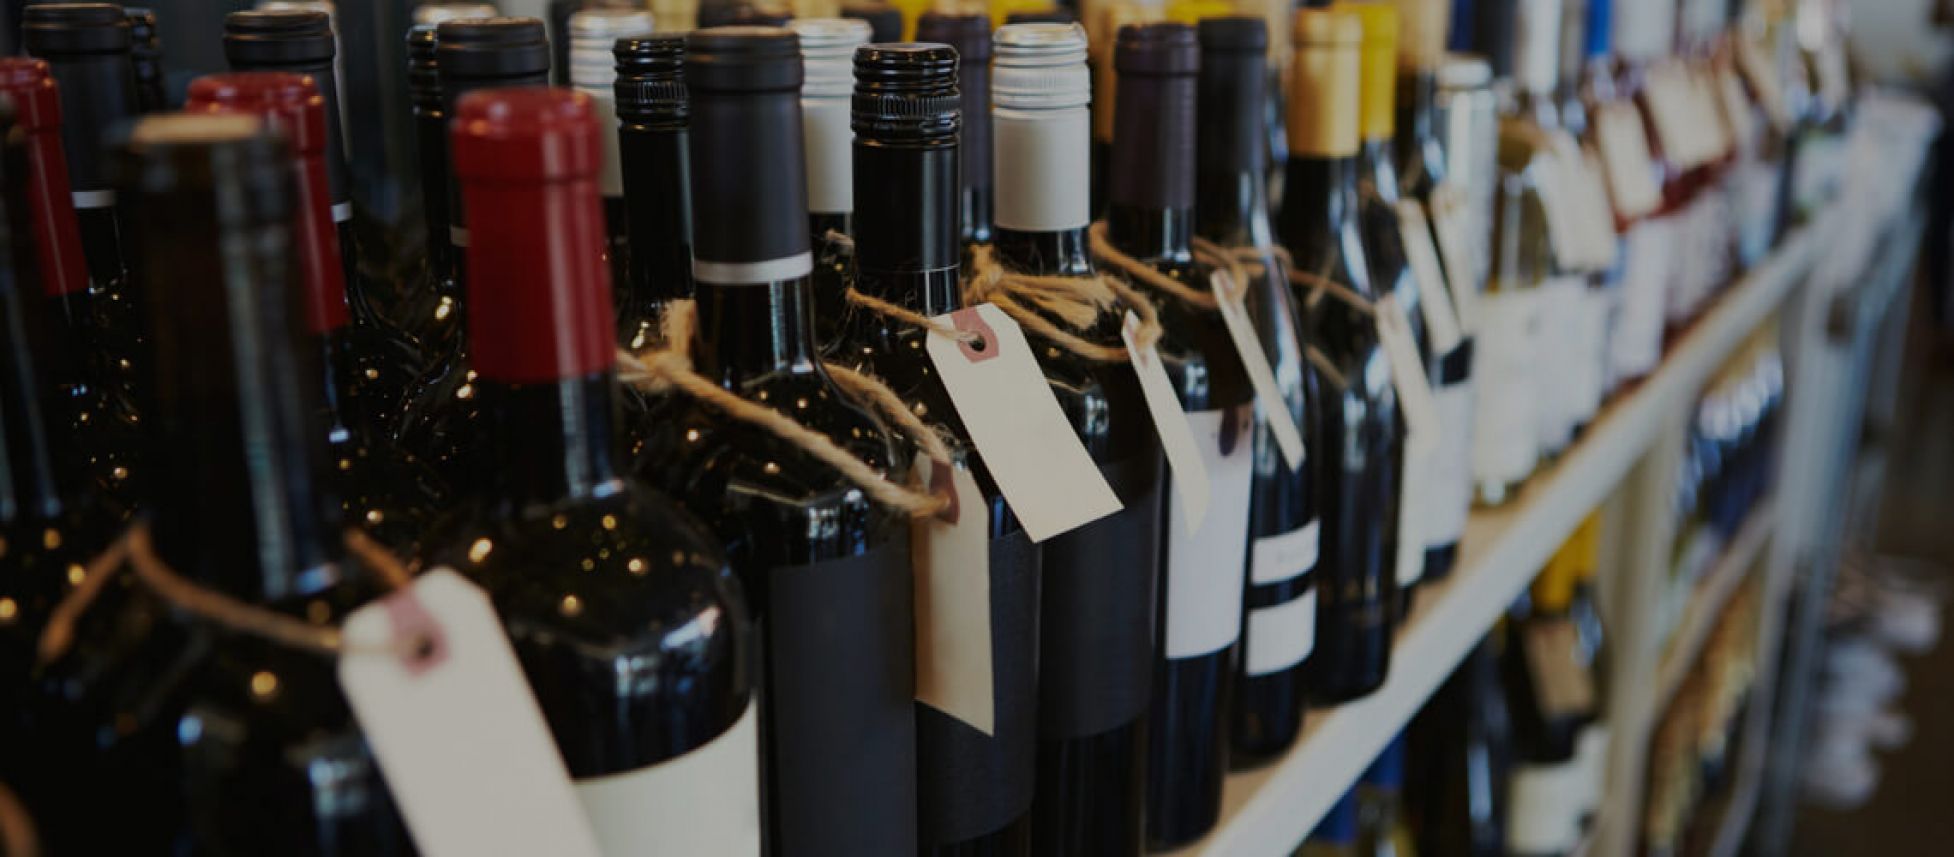 Photo for: Private Label Wine Suppliers In USA